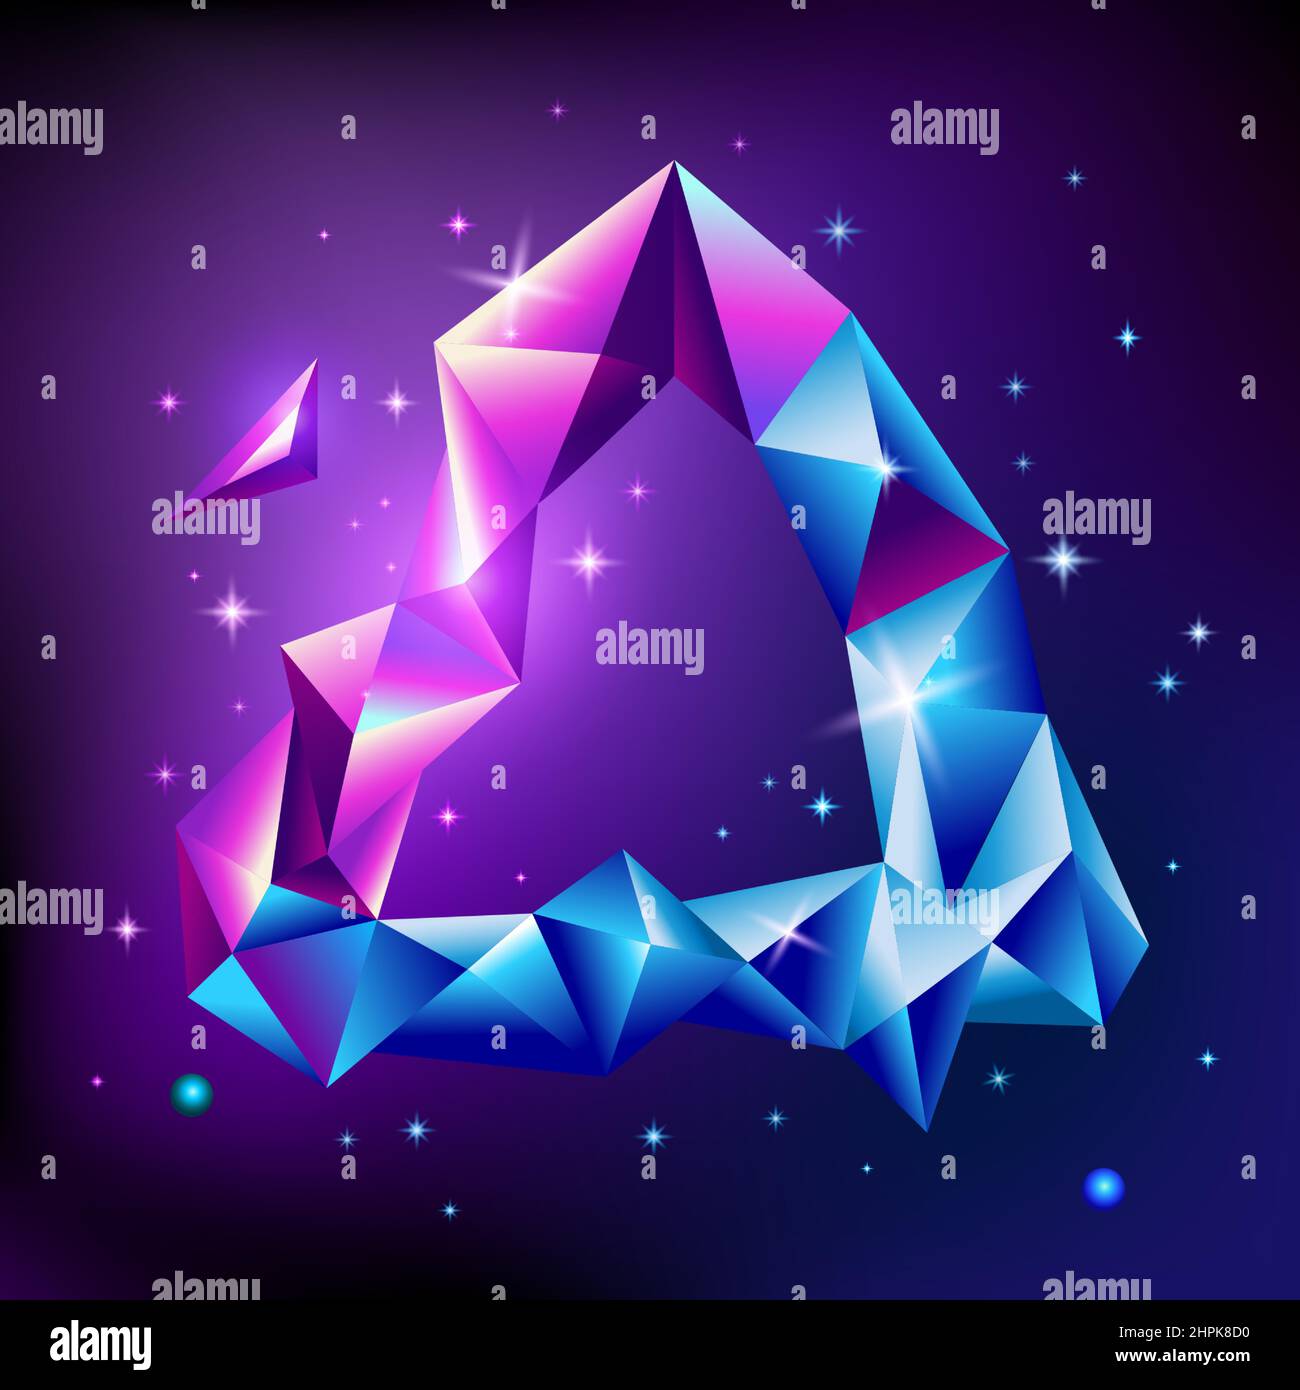 Abstract trendy cosmic poster with triangle crystal gems frame and pyramid geometric shapes in space. Neon galaxy background. 80s style. Poster with Stock Vector